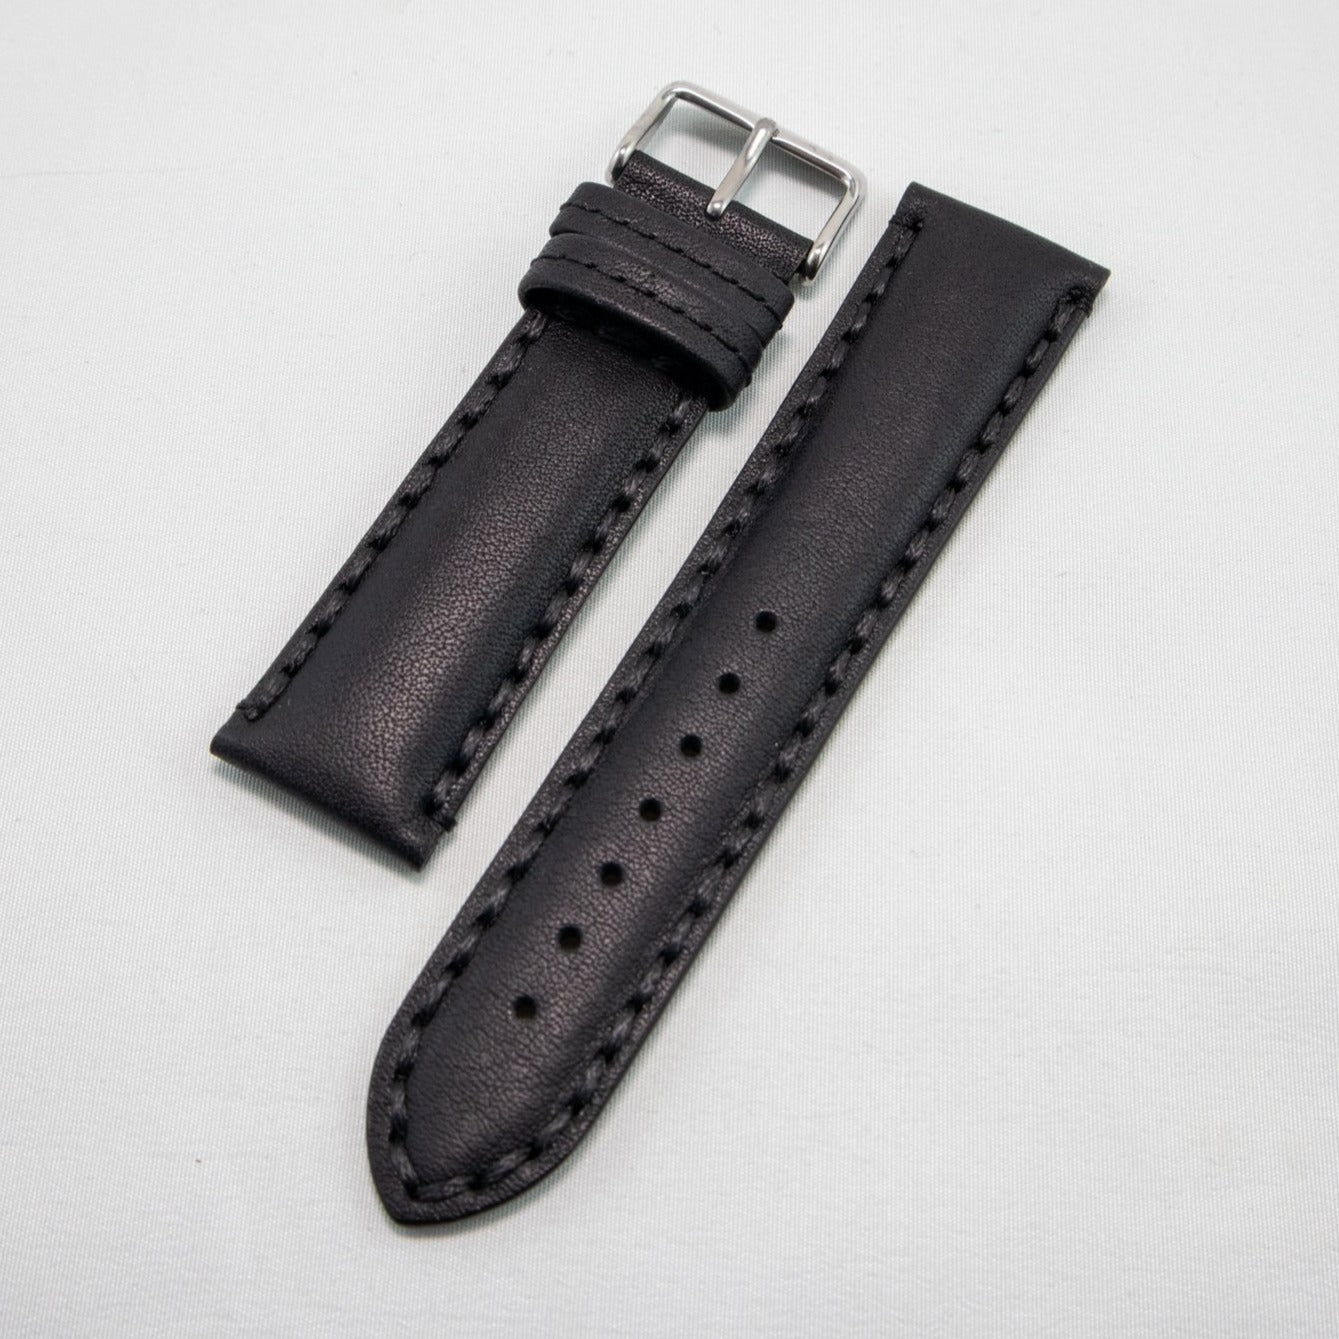 Alpine Watchstrap - Padded Double Stitched Bull Grain /